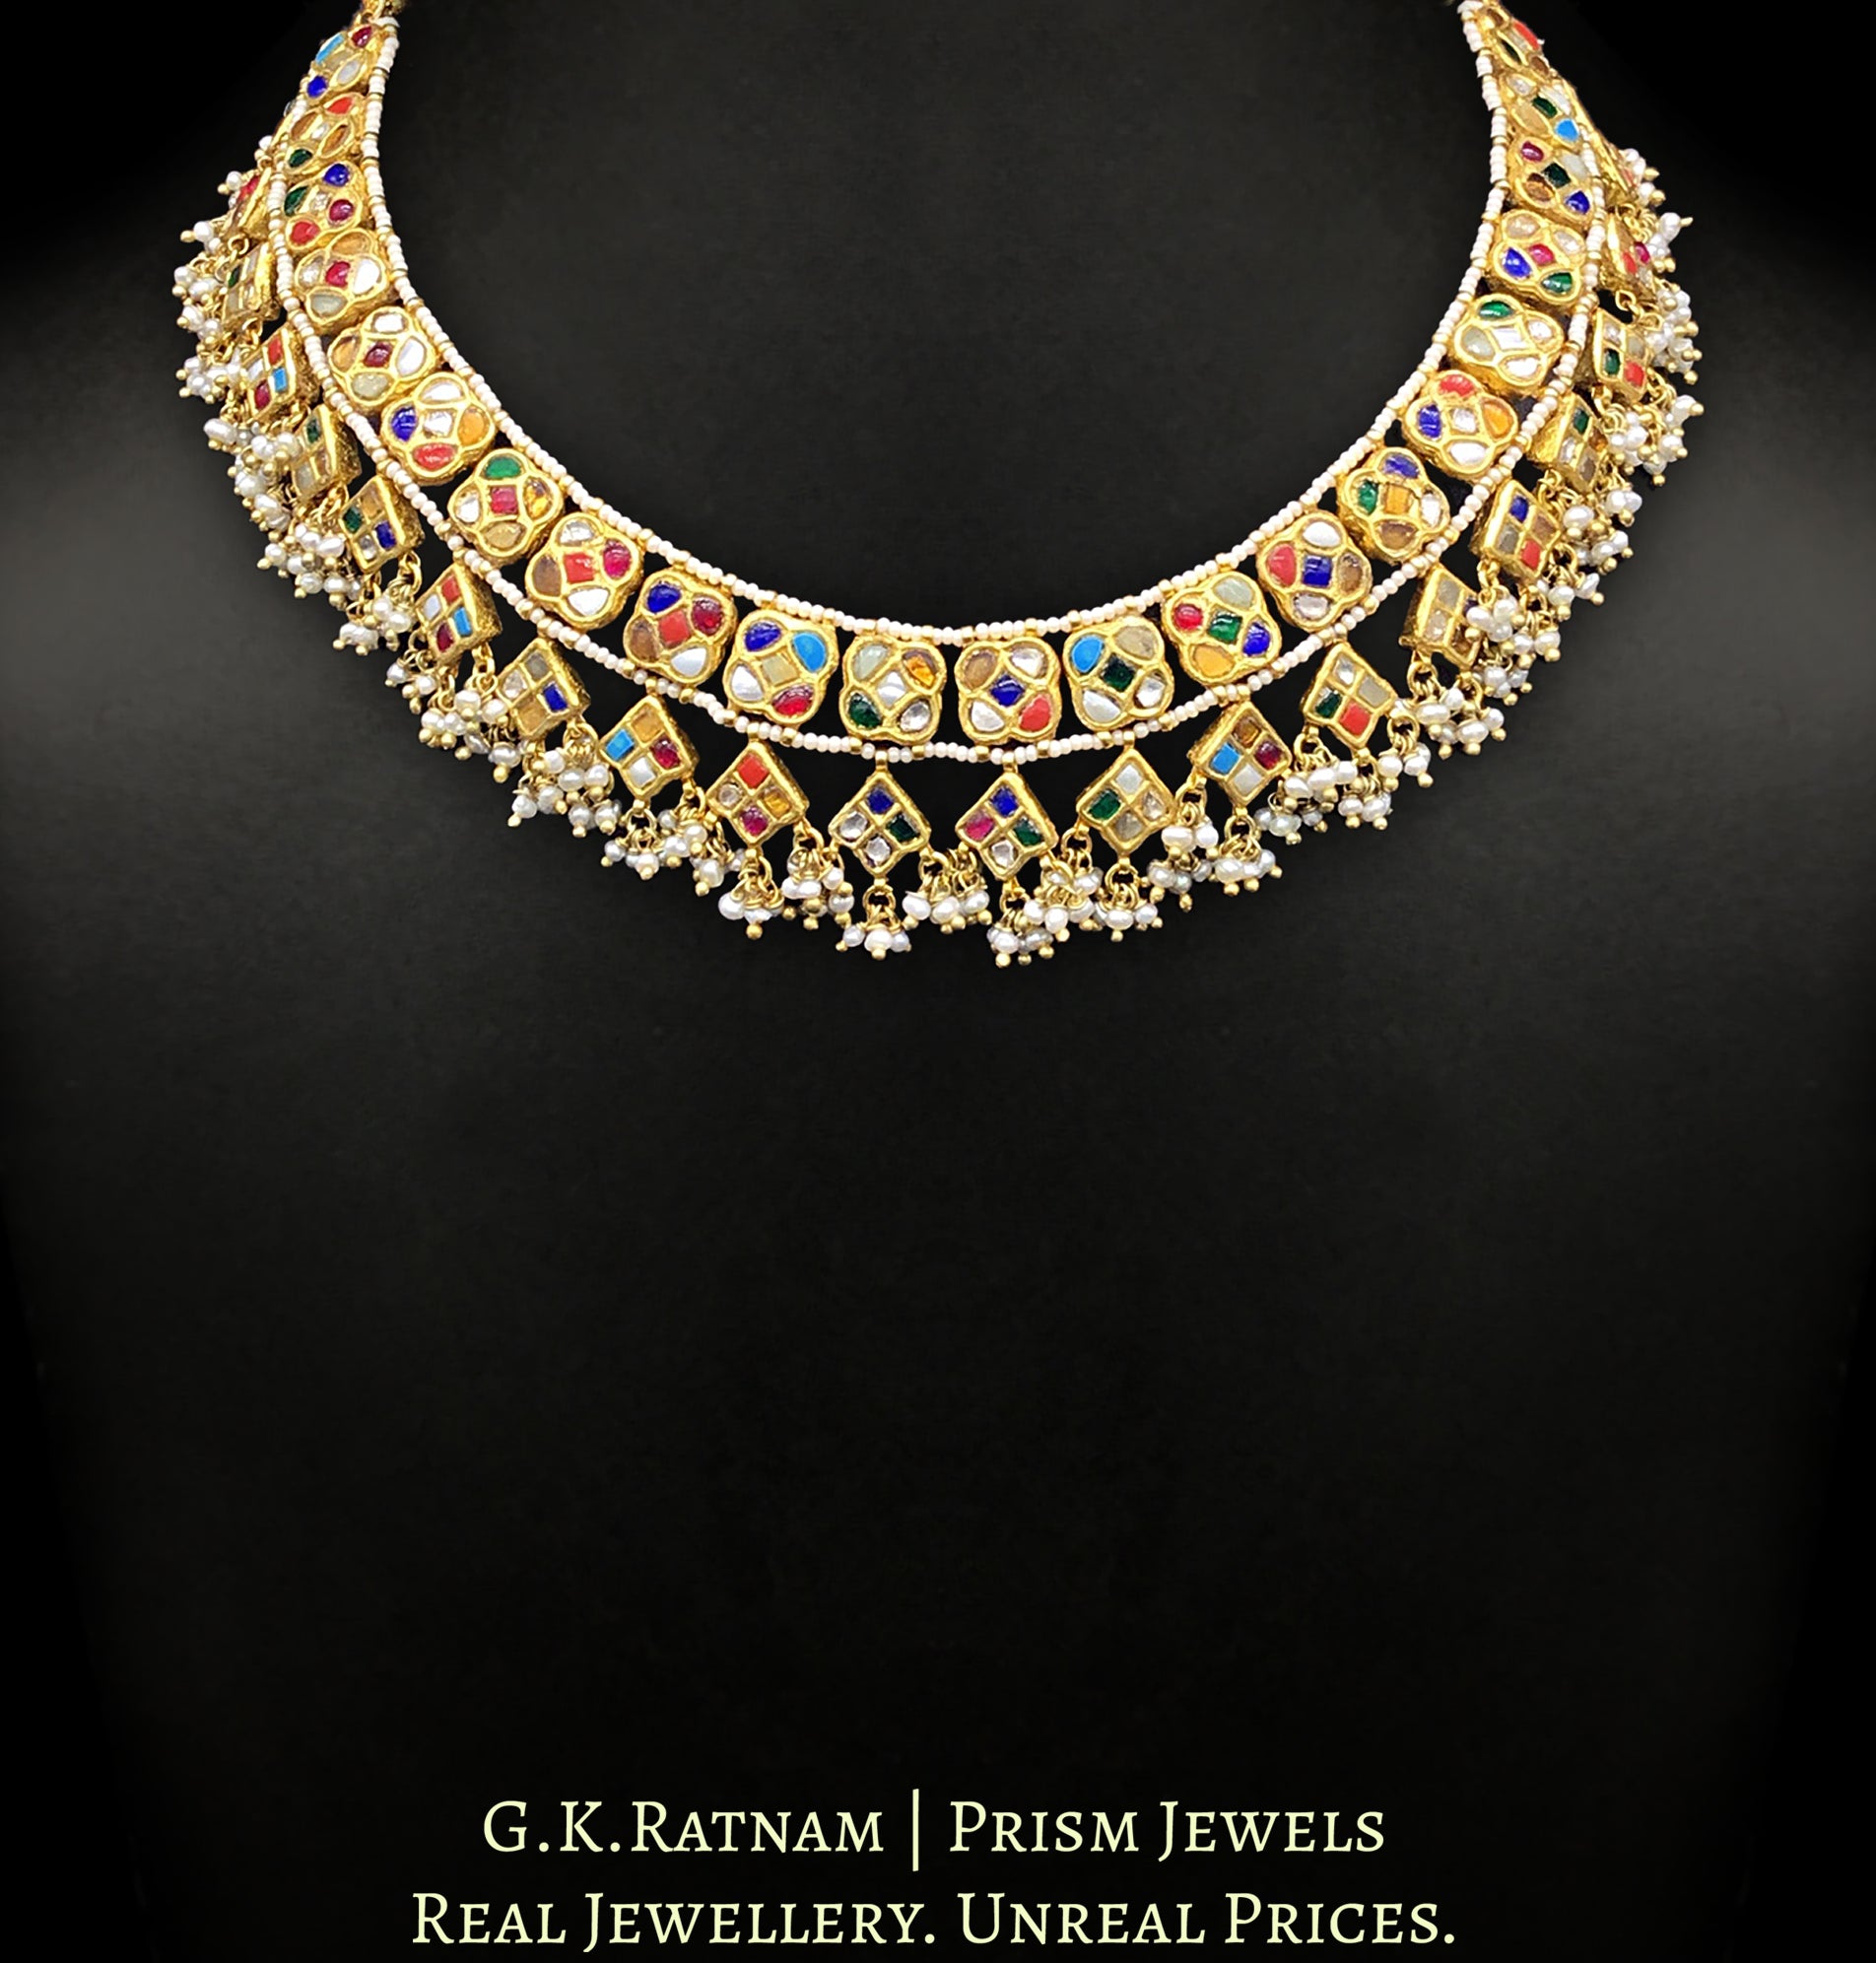 23k Gold and Diamond Polki Navratna Necklace with Natural Freshwater Pearl Clusters